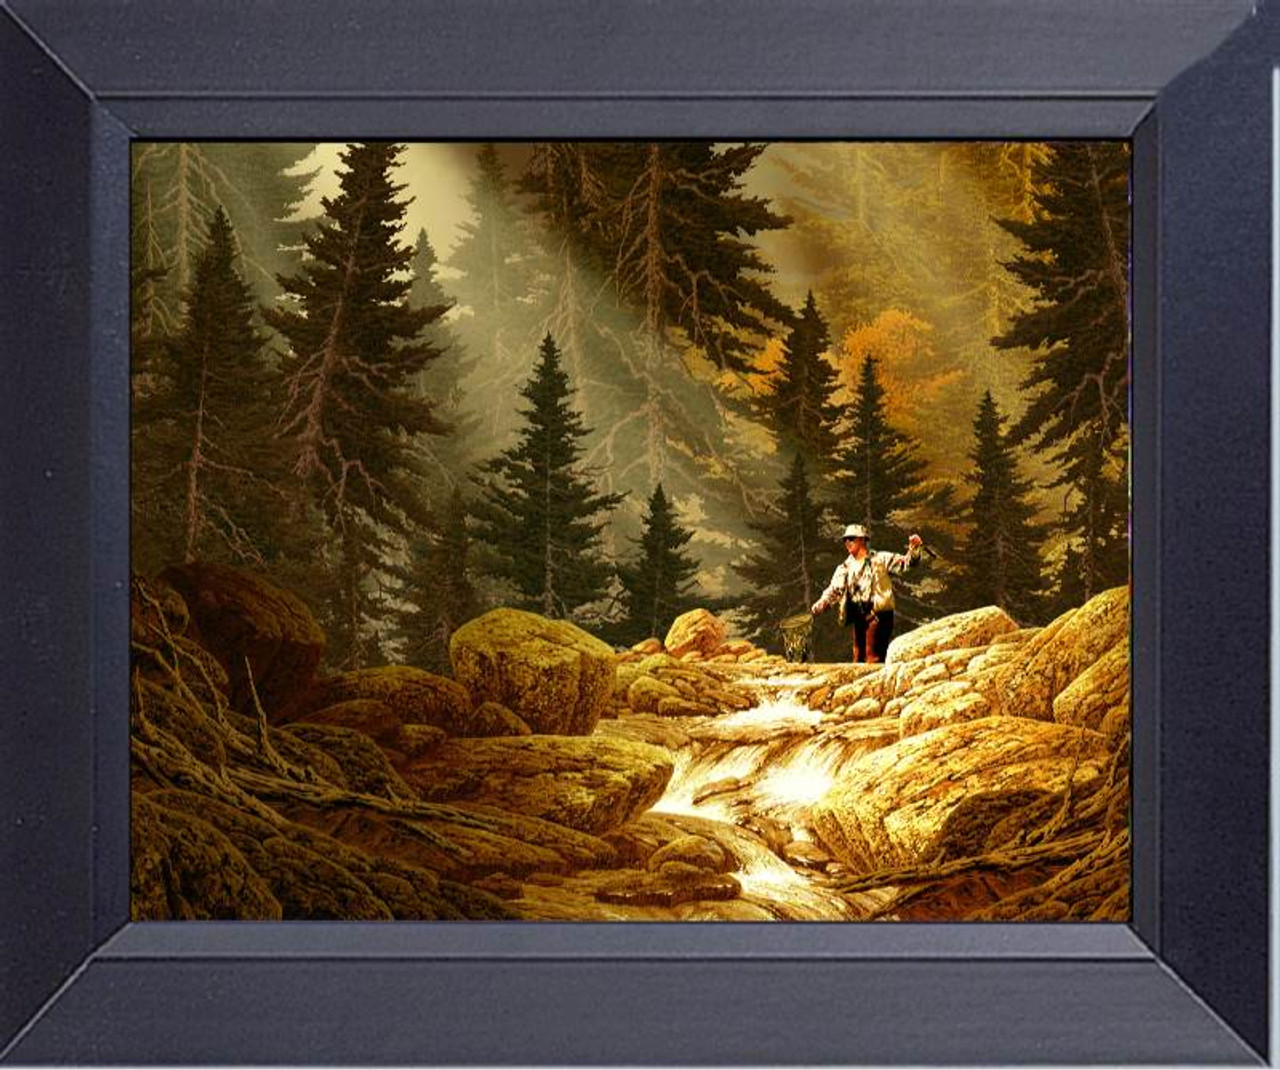 Fly Fishing For Trout In The Rockies Framed Art Photograph Print Framed Print